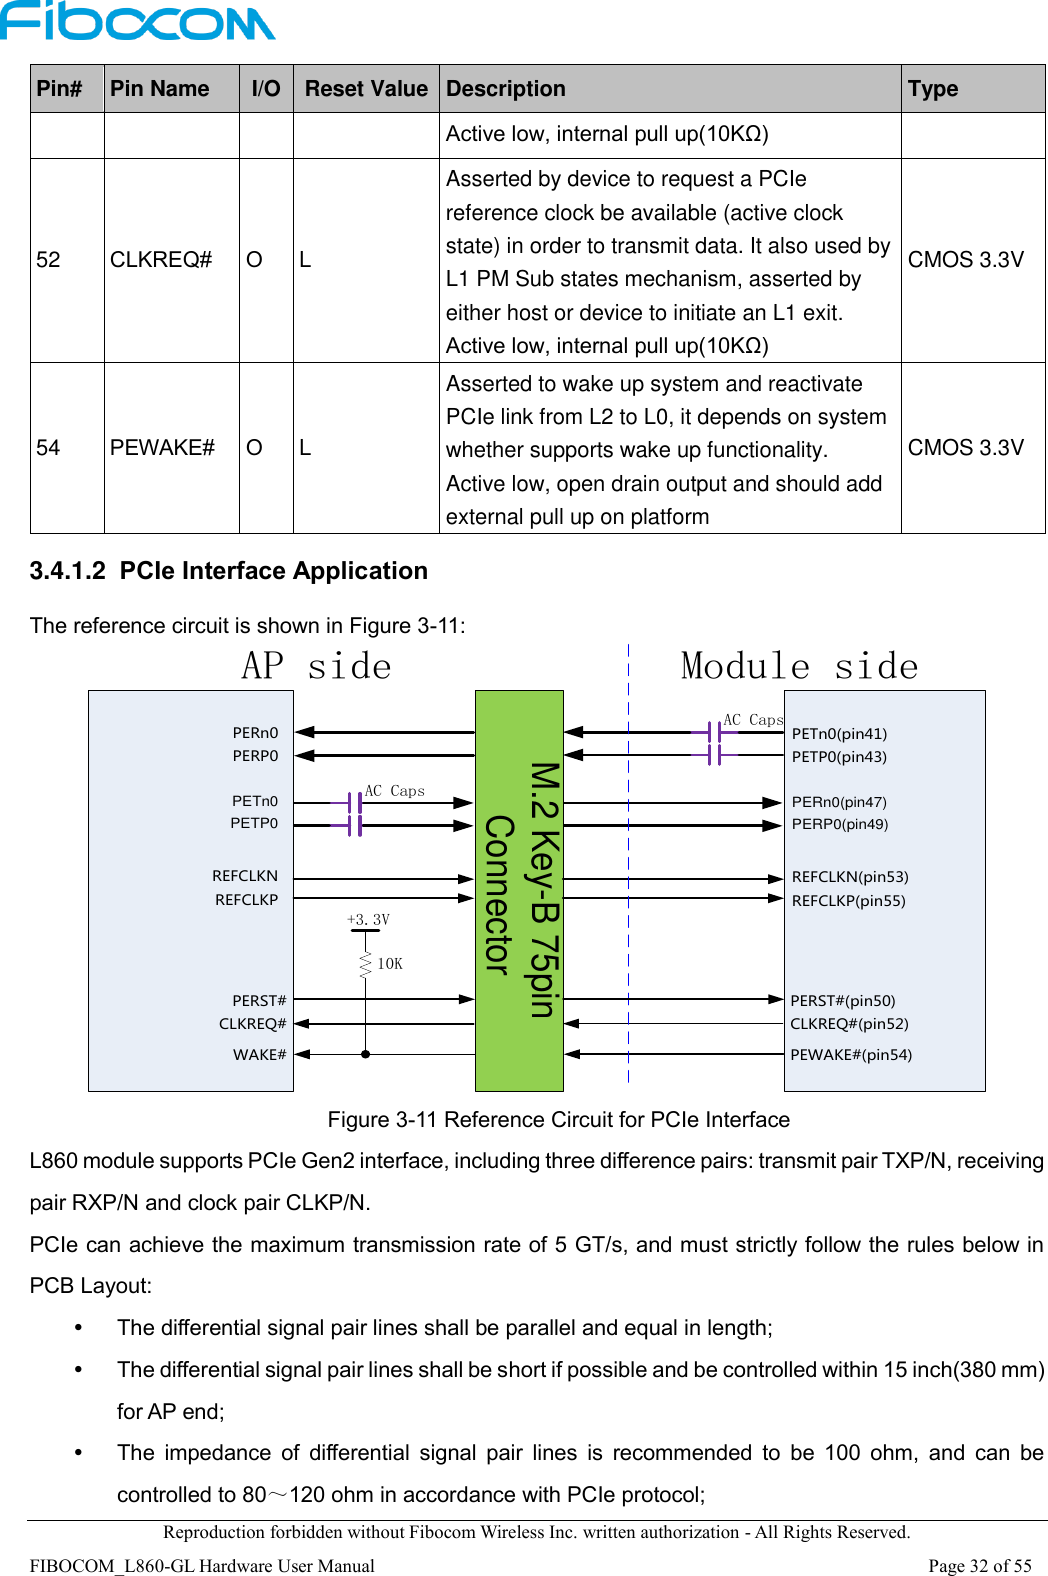  Reproduction forbidden without Fibocom Wireless Inc. written authorization - All Rights Reserved. FIBOCOM_L860-GL Hardware User Manual                                                                                                                      Page 32 of 55 Pin# Pin Name I/O Reset Value Description Type Active low, internal pull up(10KΩ) 52 CLKREQ# O L Asserted by device to request a PCIe reference clock be available (active clock state) in order to transmit data. It also used by L1 PM Sub states mechanism, asserted by either host or device to initiate an L1 exit. Active low, internal pull up(10KΩ) CMOS 3.3V 54 PEWAKE# O L Asserted to wake up system and reactivate PCIe link from L2 to L0, it depends on system whether supports wake up functionality. Active low, open drain output and should add external pull up on platform CMOS 3.3V 3.4.1.2  PCIe Interface Application The reference circuit is shown in Figure 3-11: Module sideM.2 Key-B 75pin ConnectorAP sideAC CapsAC CapsPERST#CLKREQ#WAKE#PERST#(pin50)CLKREQ#(pin52)PEWAKE#(pin54)PERn0PERP0PETn0PETP0REFCLKNREFCLKPPETn0(pin41)PETP0(pin43)PERn0(pin47)PERP0(pin49)REFCLKN(pin53)REFCLKP(pin55)+3.3V10K Figure 3-11 Reference Circuit for PCIe Interface L860 module supports PCIe Gen2 interface, including three difference pairs: transmit pair TXP/N, receiving pair RXP/N and clock pair CLKP/N. PCIe can achieve the maximum transmission rate of 5 GT/s, and must strictly follow the rules below in PCB Layout:  The differential signal pair lines shall be parallel and equal in length;  The differential signal pair lines shall be short if possible and be controlled within 15 inch(380 mm) for AP end;  The  impedance  of  differential  signal  pair  lines  is  recommended  to  be  100  ohm,  and  can  be controlled to 80～120 ohm in accordance with PCIe protocol; 